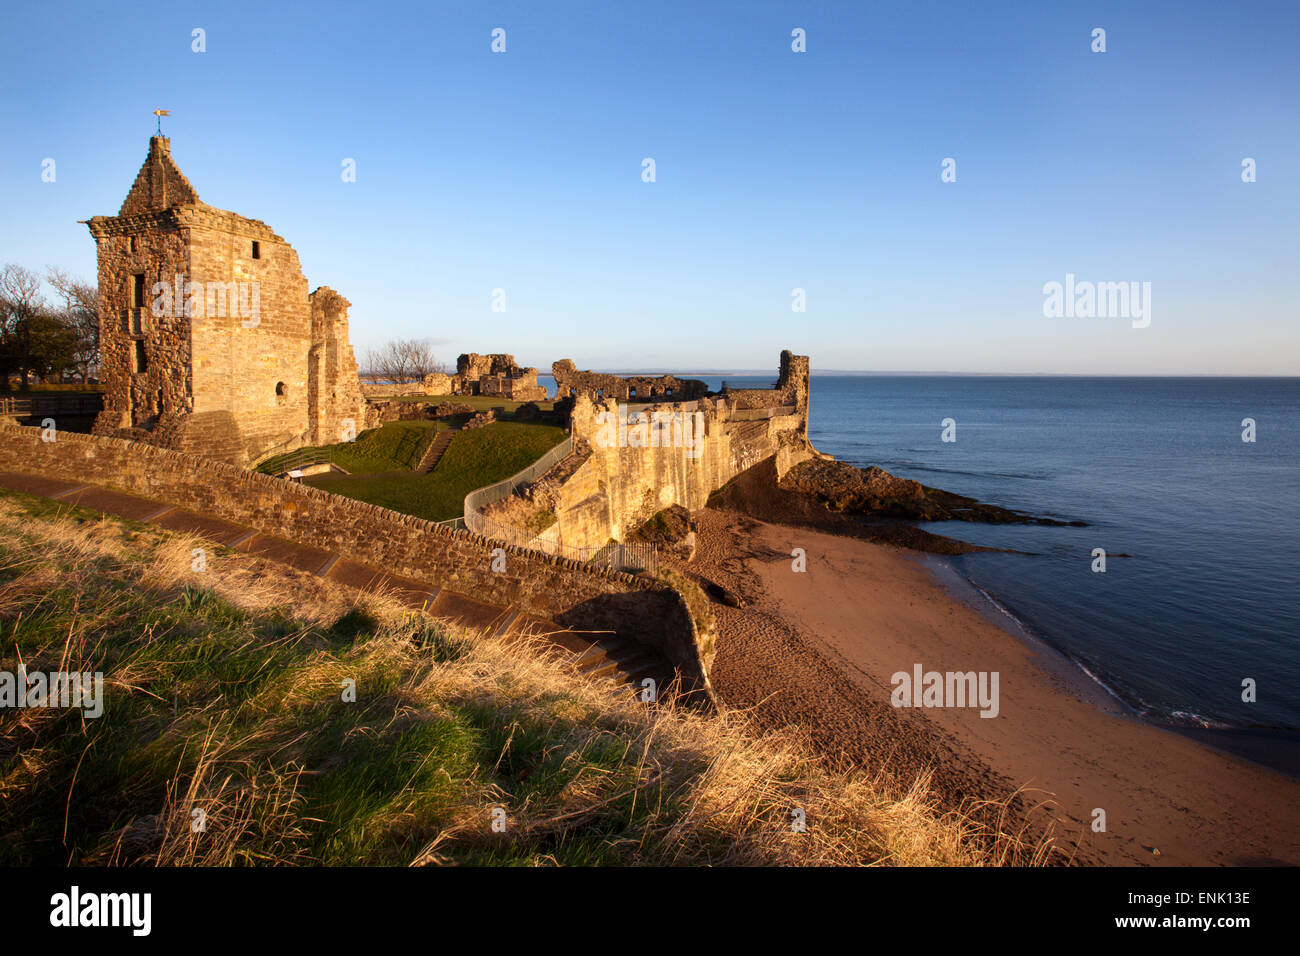 St. Andrews Castle and Castle Sands from The Scores at sunrise, Fife, Scotland, United Kingdom, Europe Stock Photo